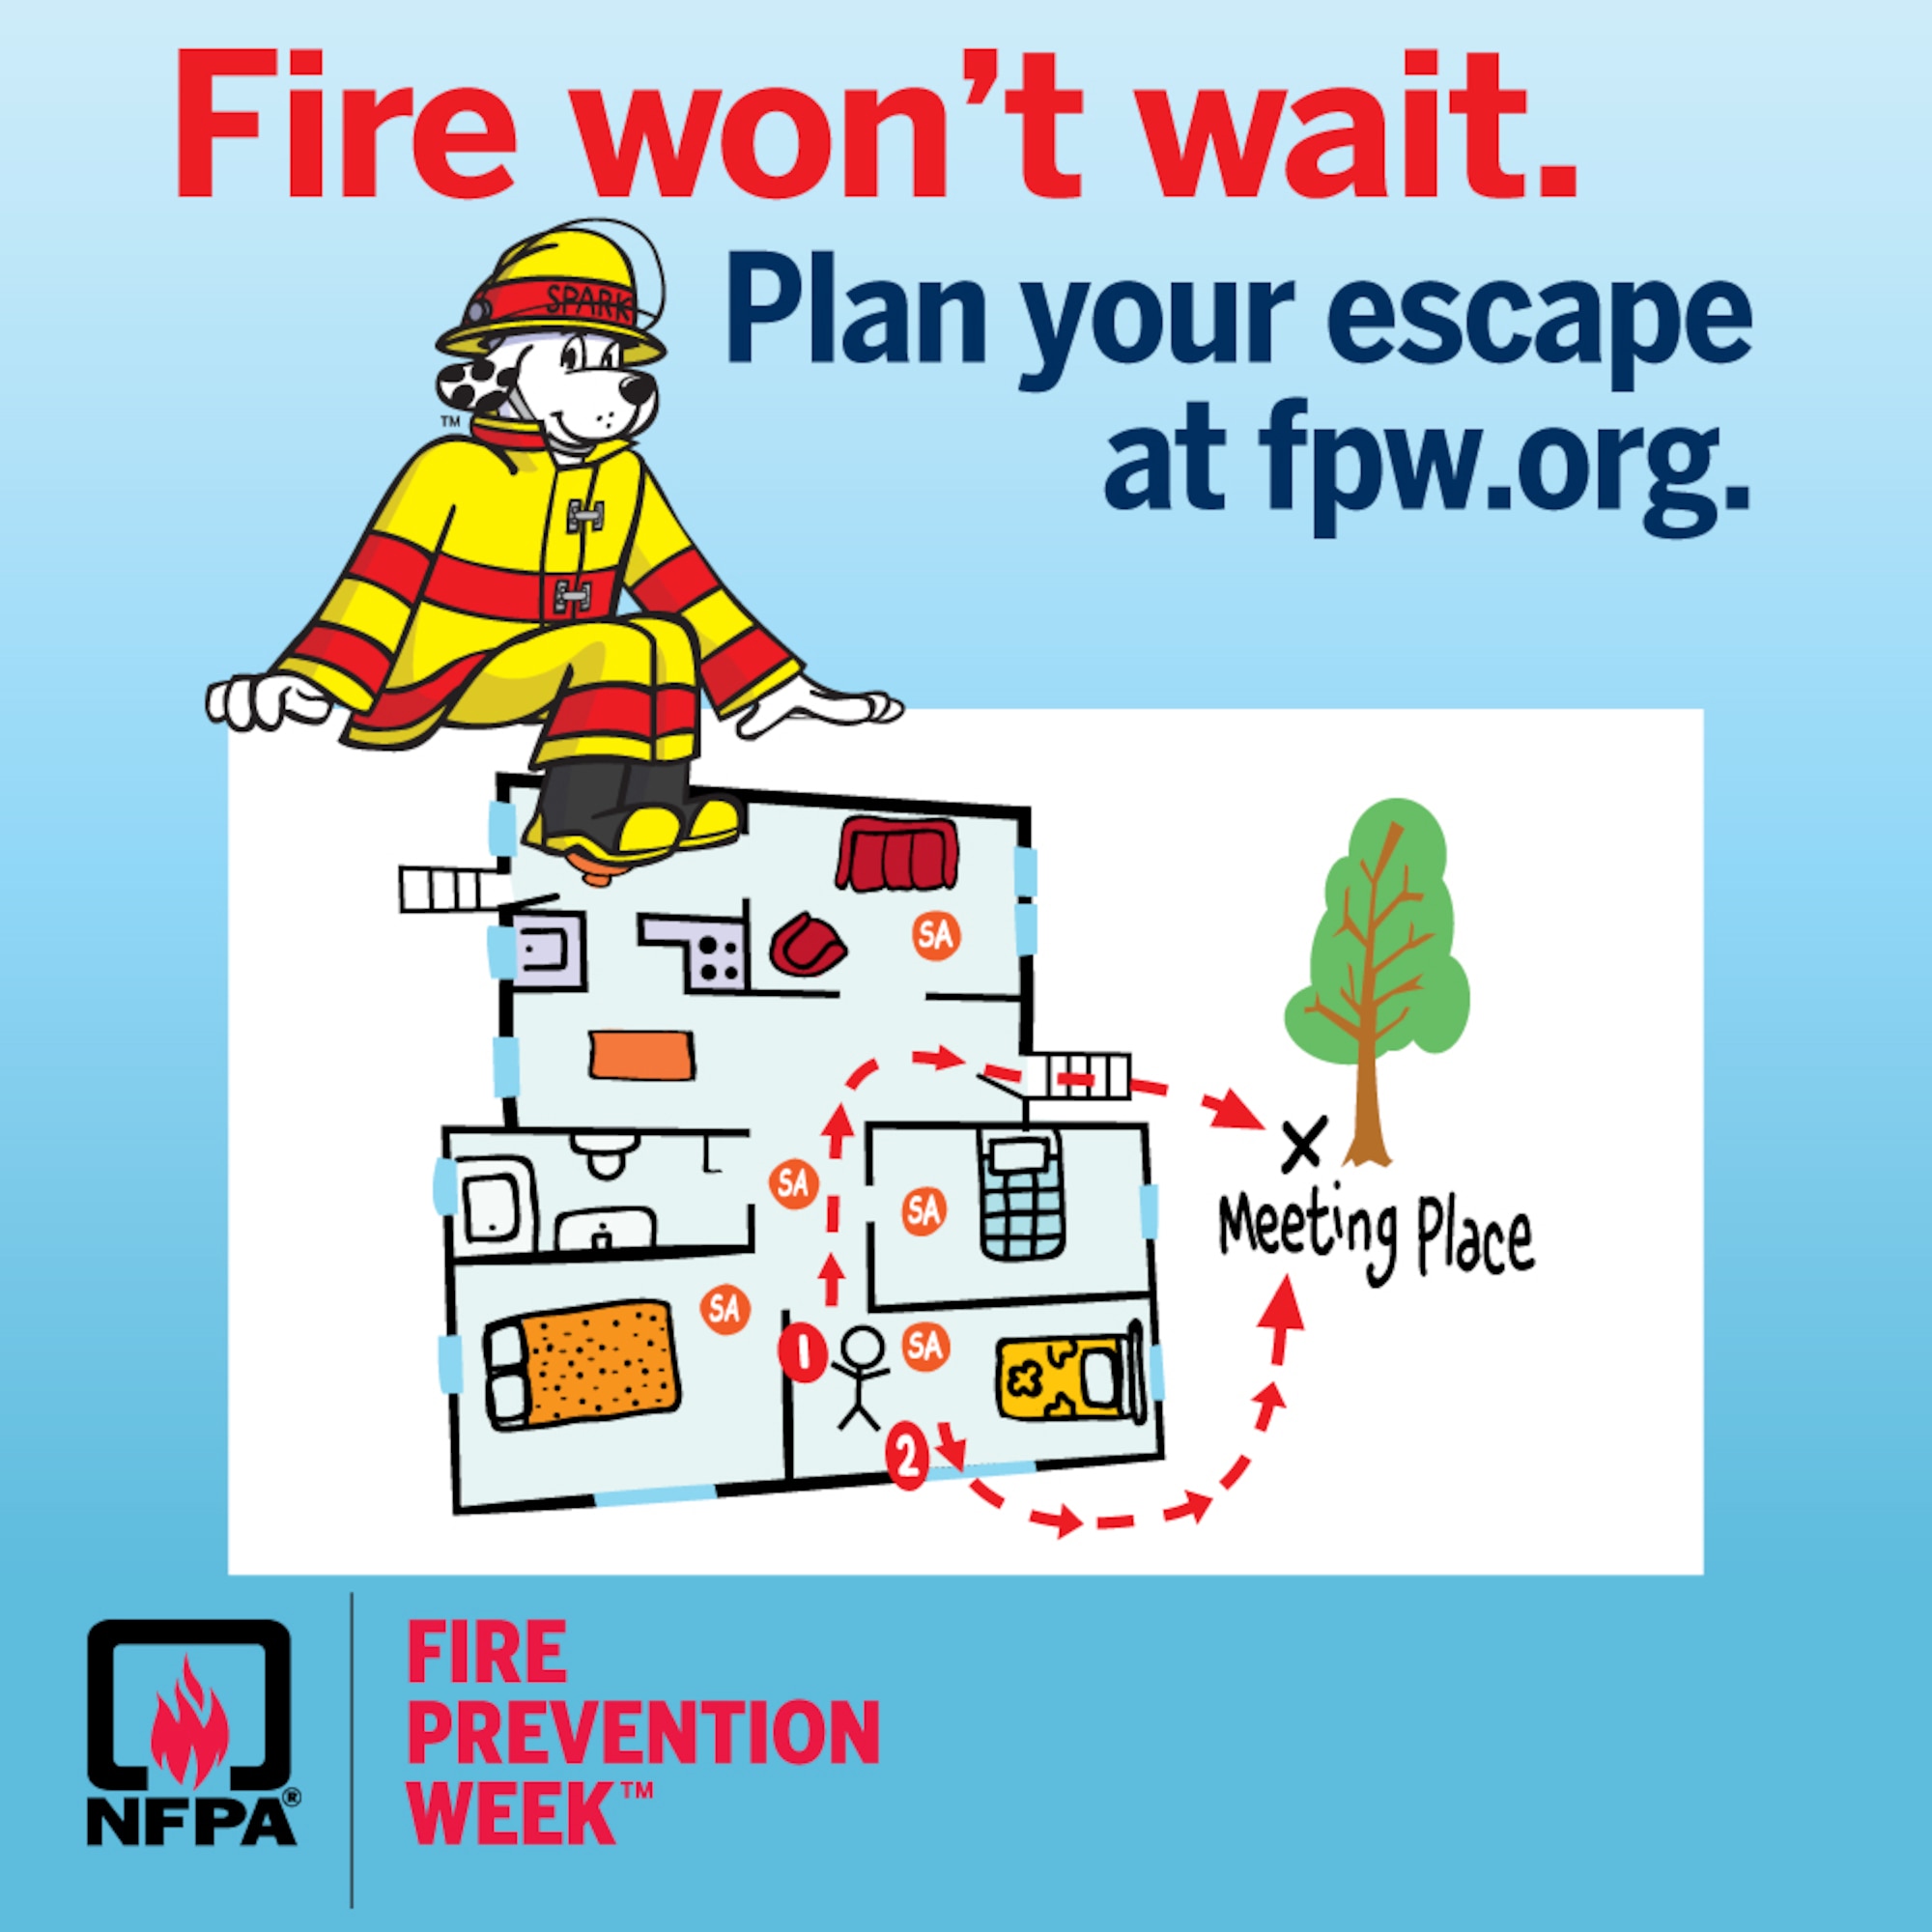 Fire Prevention Week, sponsored by the National Fire Protection Association, is Oct. 9-15. The theme of this year’s Fire Prevention Week campaign is “Fire won’t wait. Plan your escape.” Arnold Air Force Base Fire and Emergency Services officials are urging base personnel to develop fire escape plans for their homes, maintain their residential smoke alarms and familiarize themselves with fire evacuation procedures for their respective work areas. (Courtesy graphic)